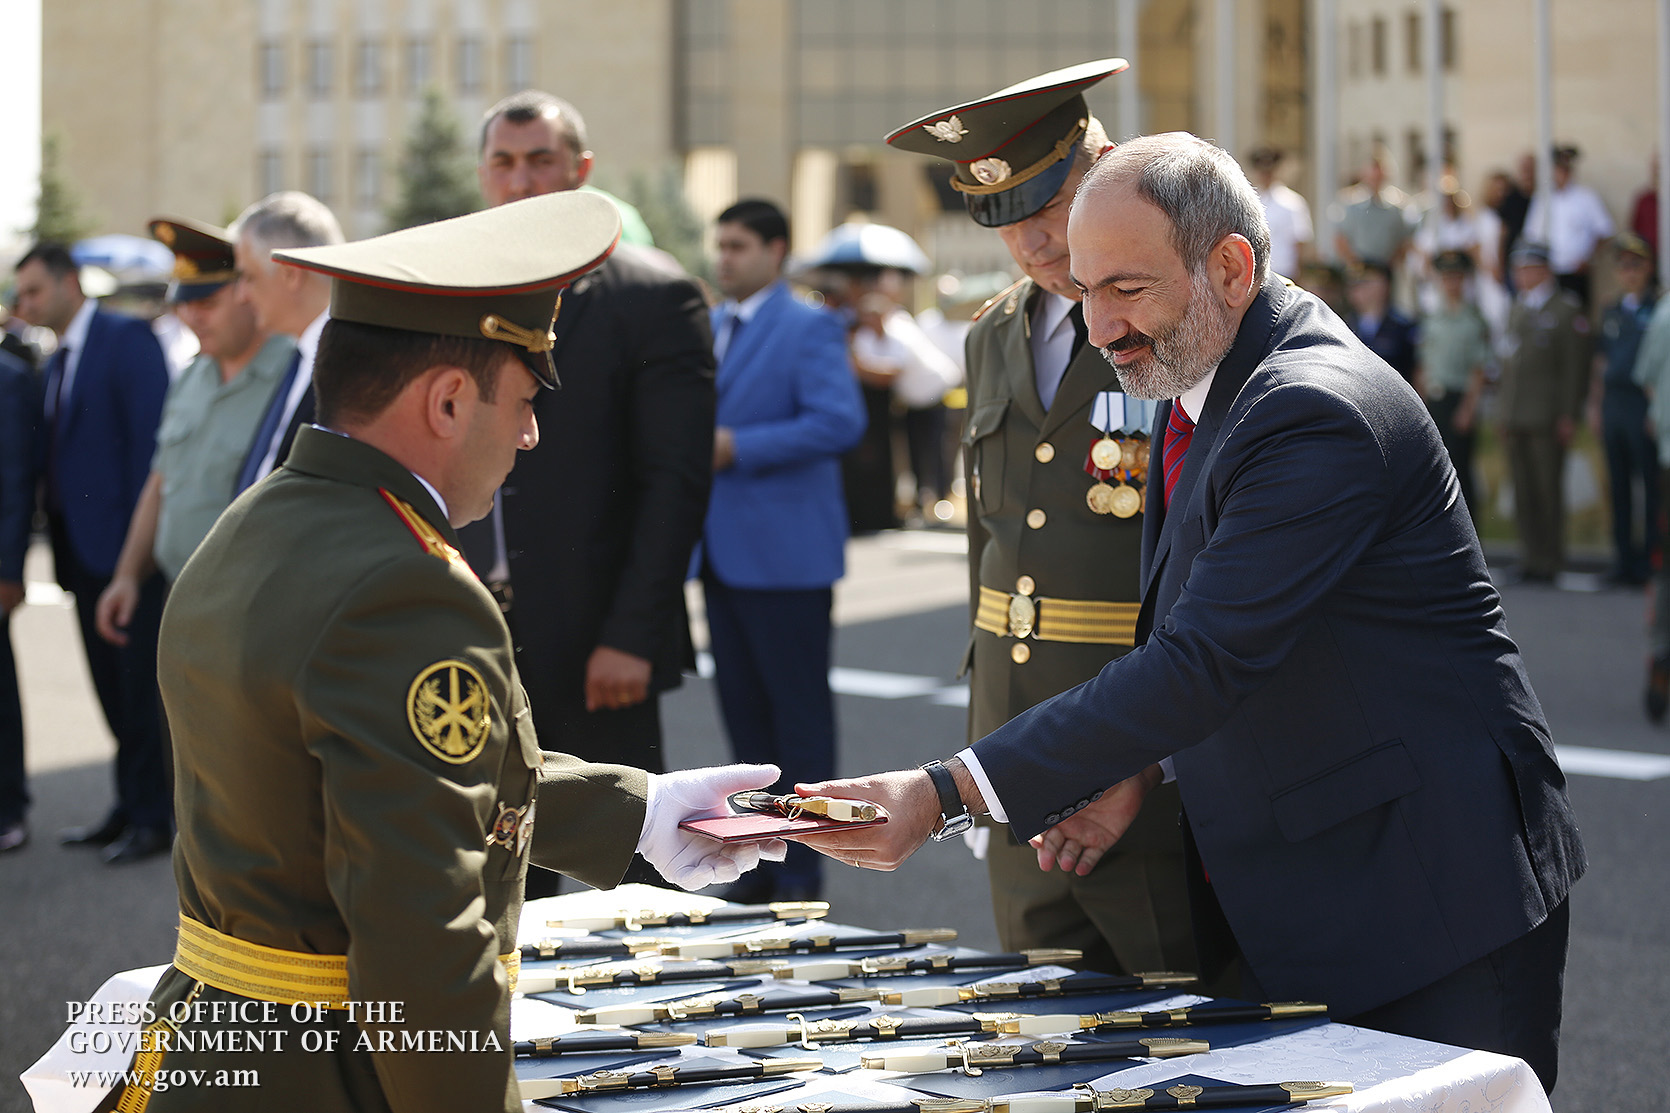 The authority of each officer should be much greater than that of his epaulettes – Nikol Pashinyan meets with graduates of military educational institutions